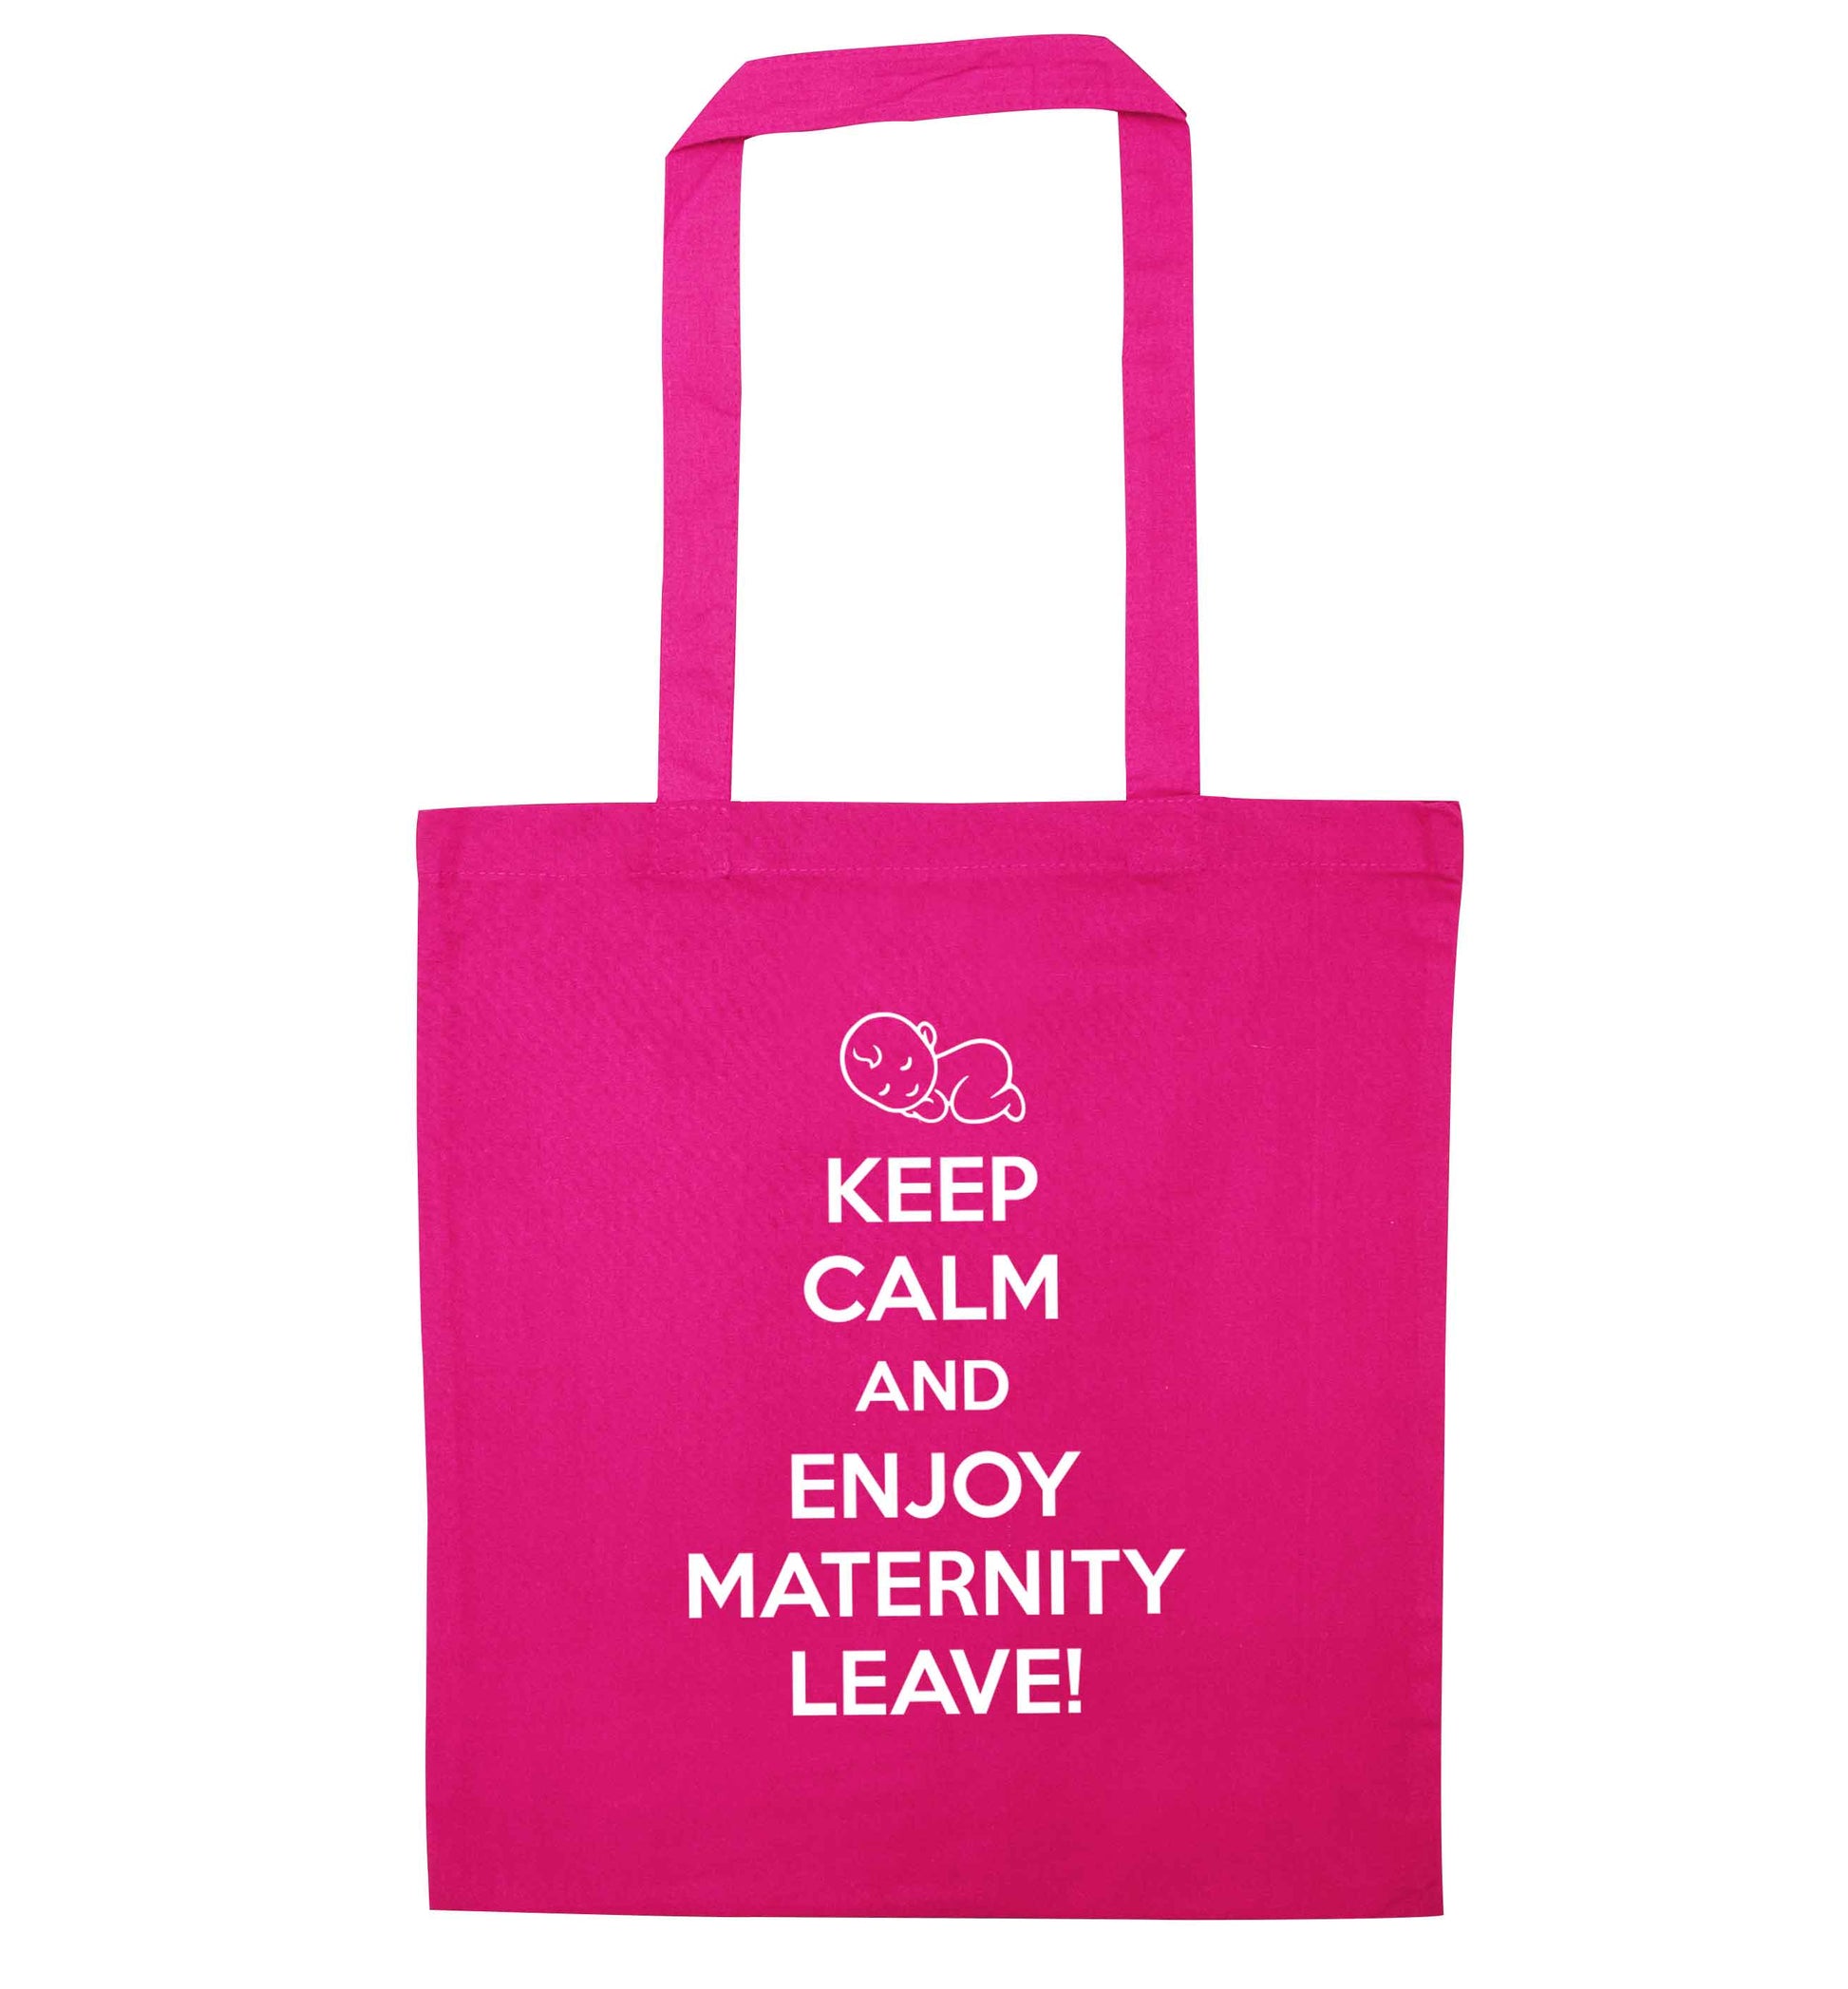 Keep calm and enjoy maternity leave pink tote bag